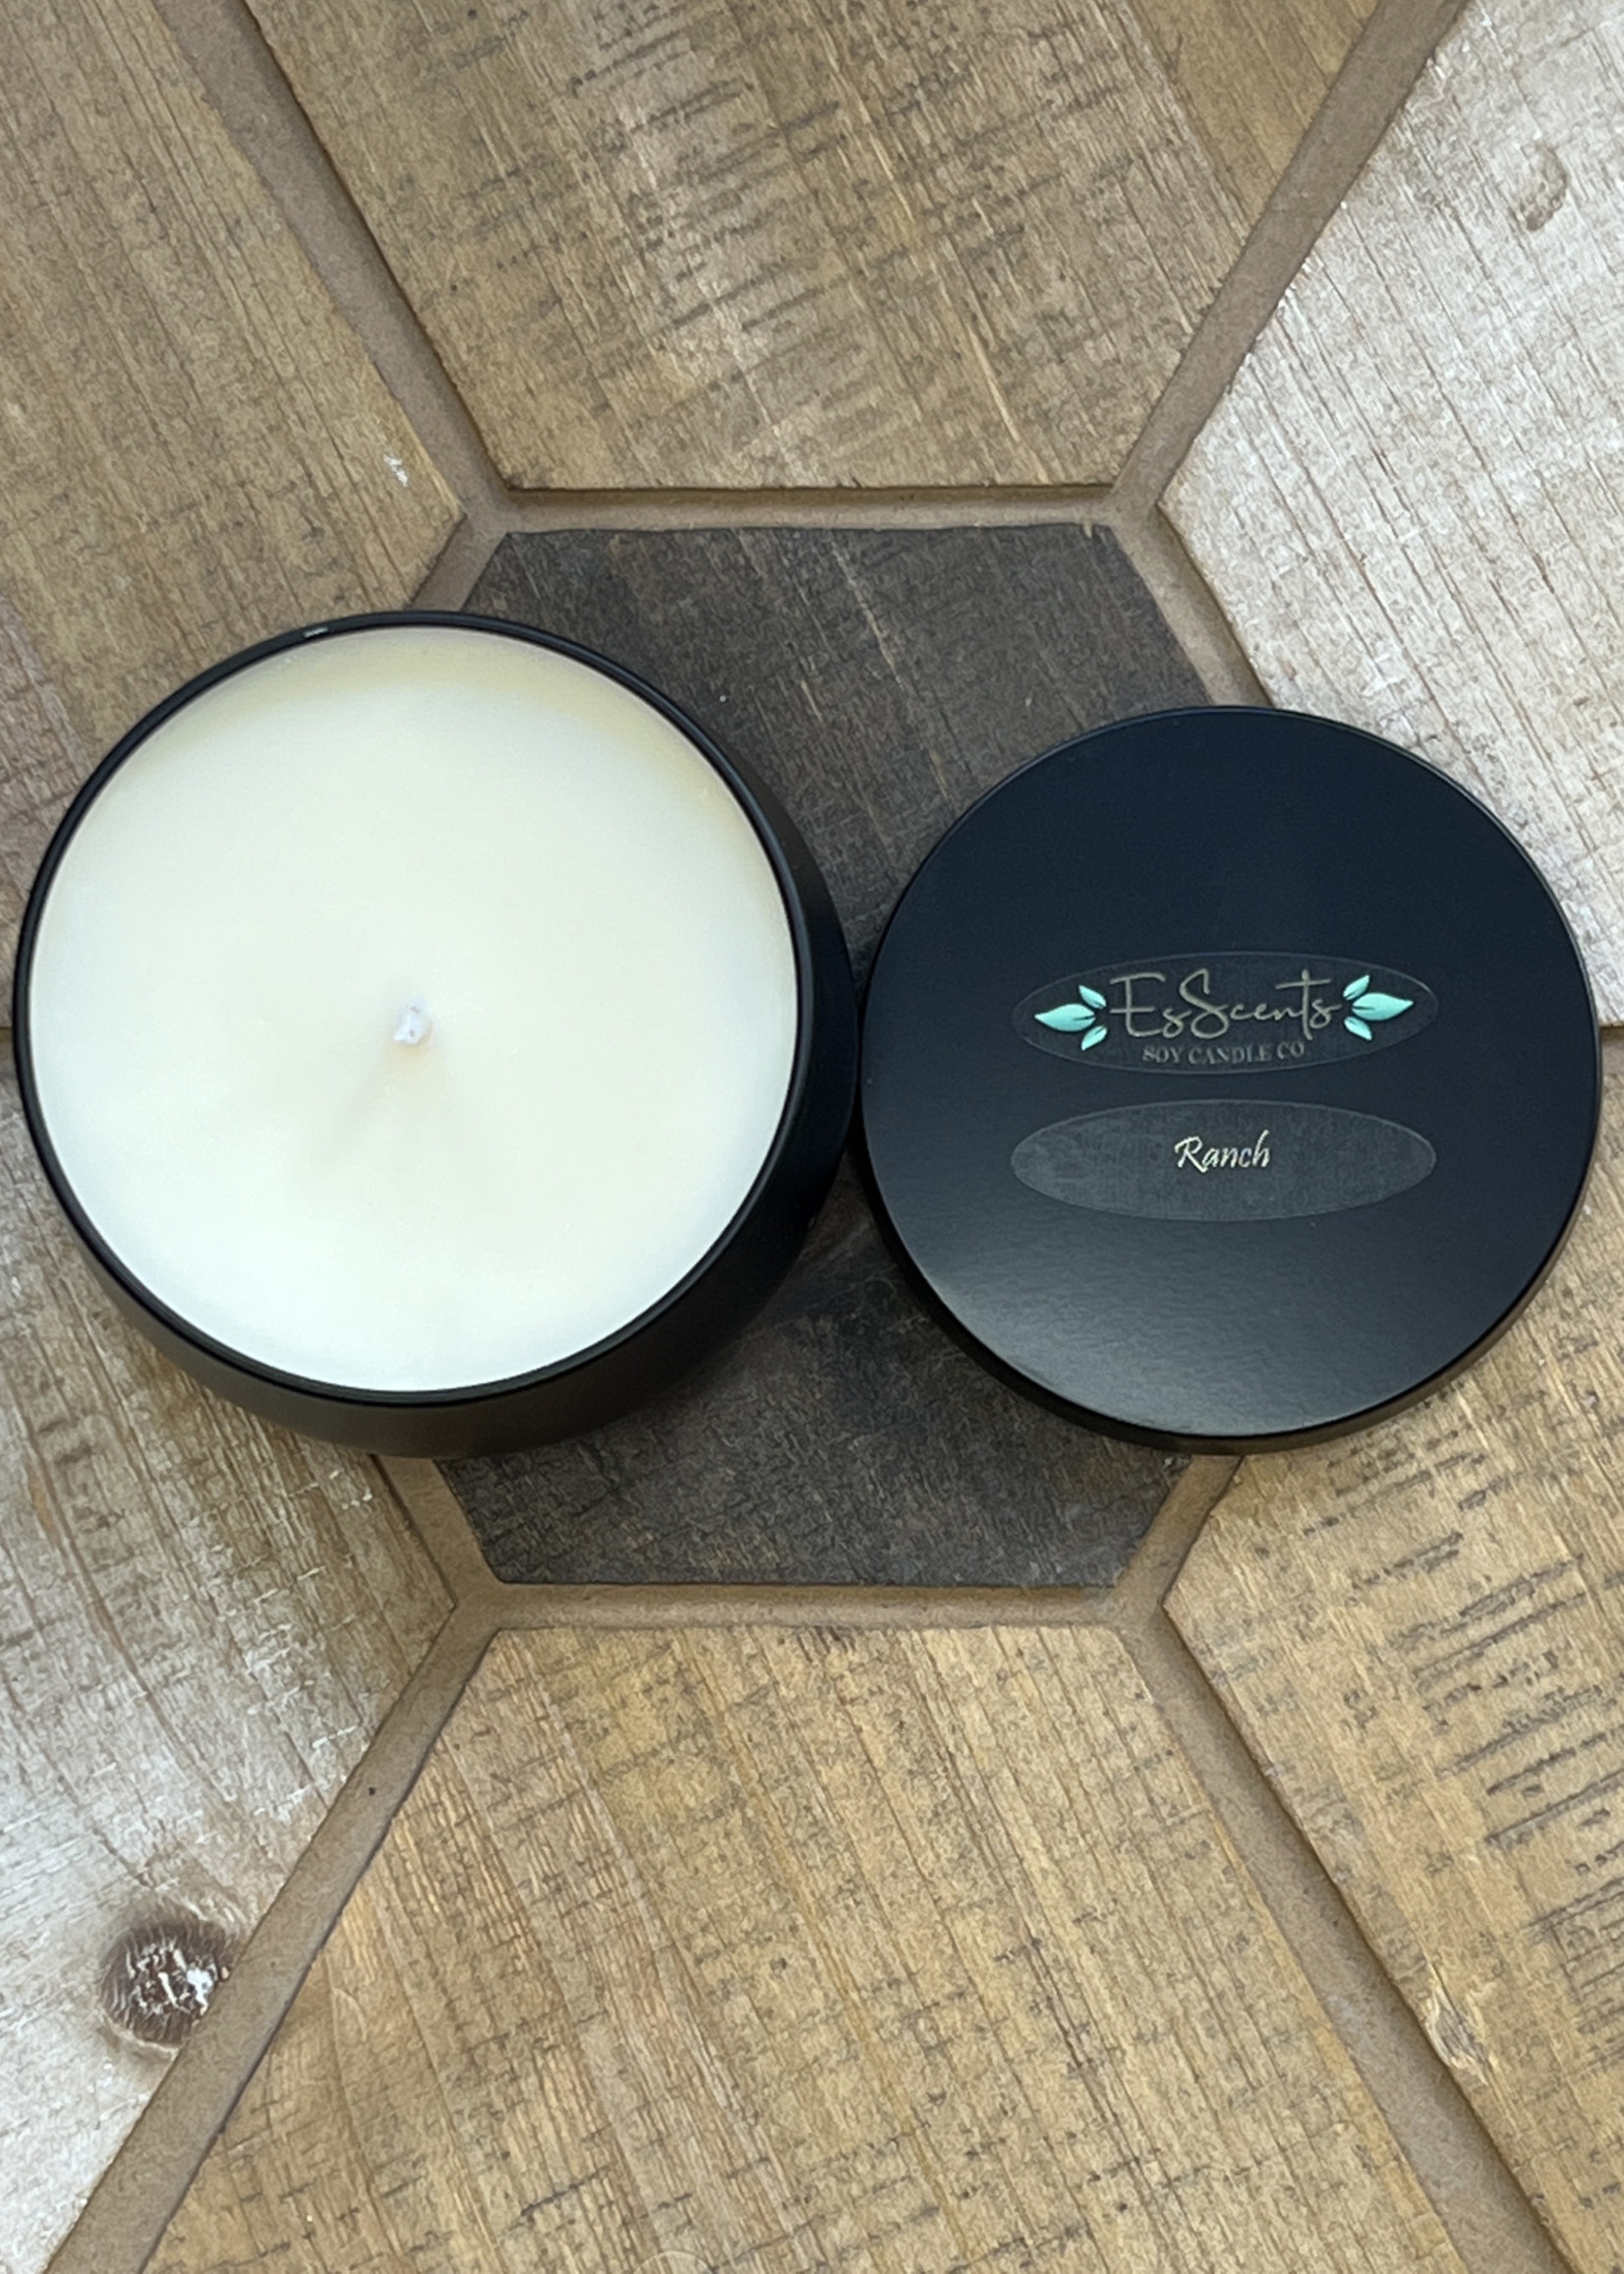 EsScents Soy Candle Co. Ranch Soy Candle 8oz